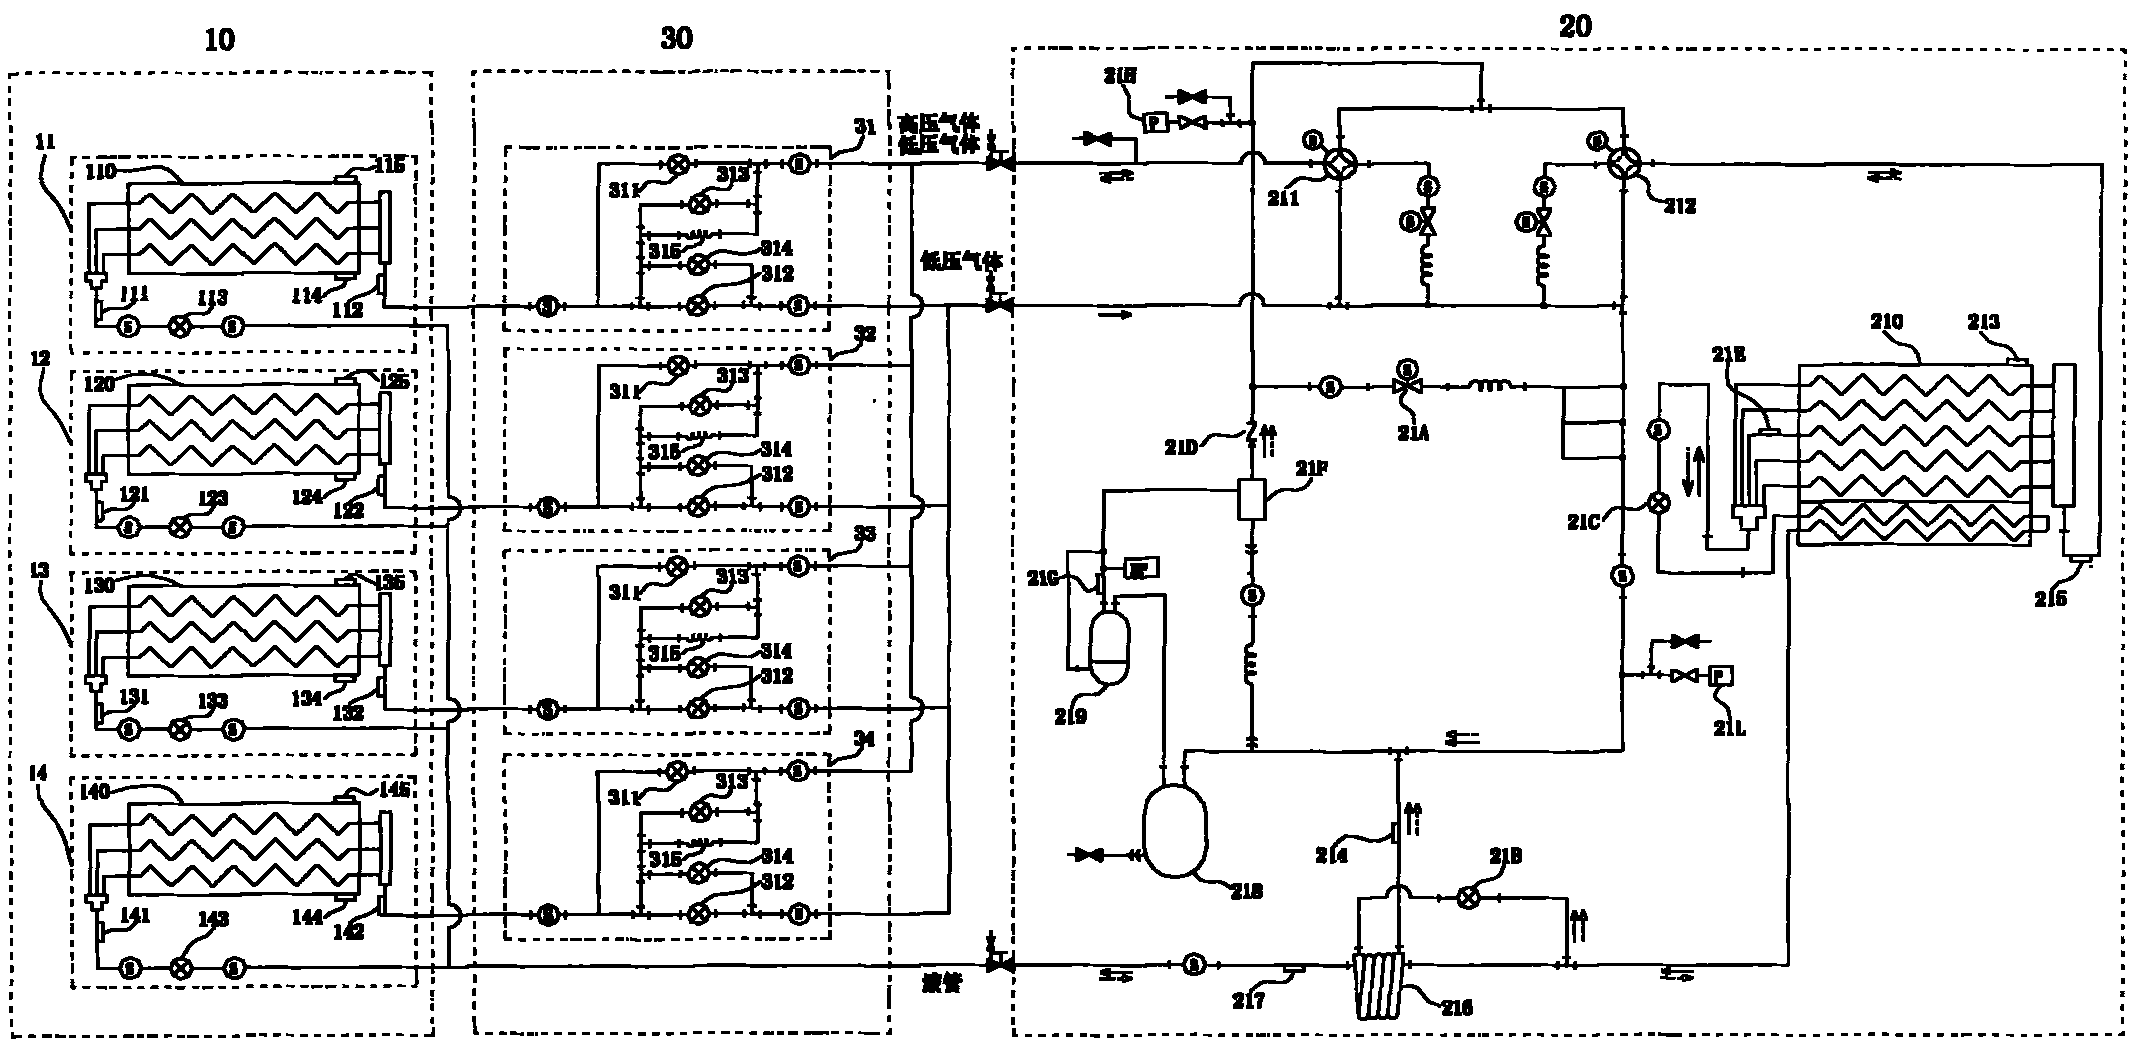 Heat recovery type multi-connection air condition unit